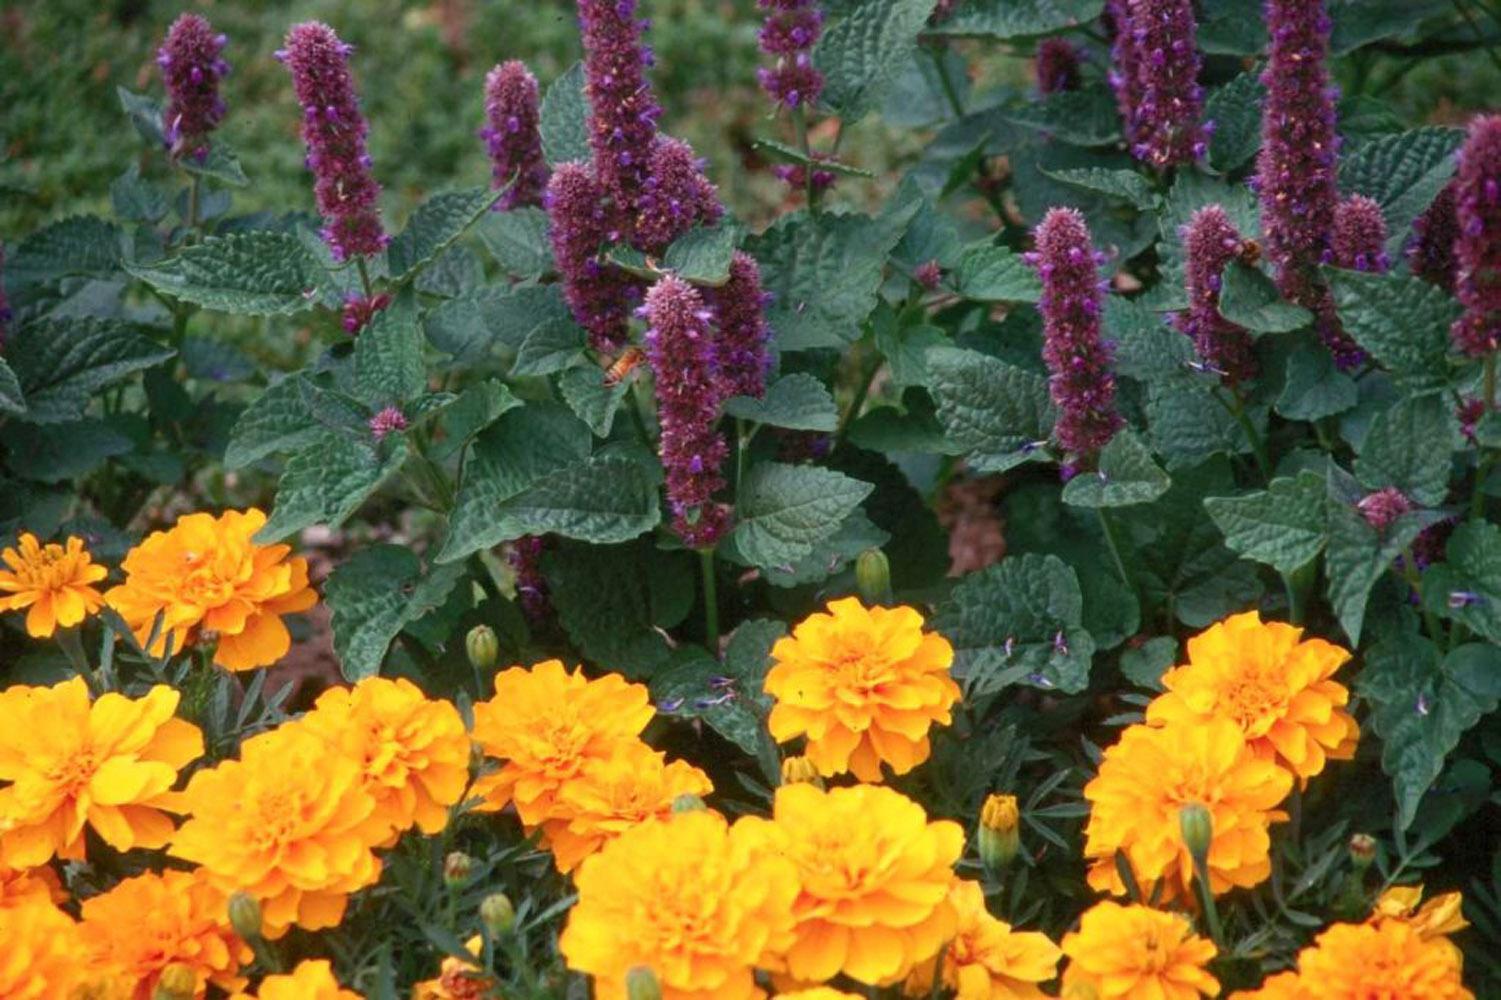 In the flower garden, plant Honey Bee Blue boldly in drifts adjacent to gold-yellow and orange marigolds .